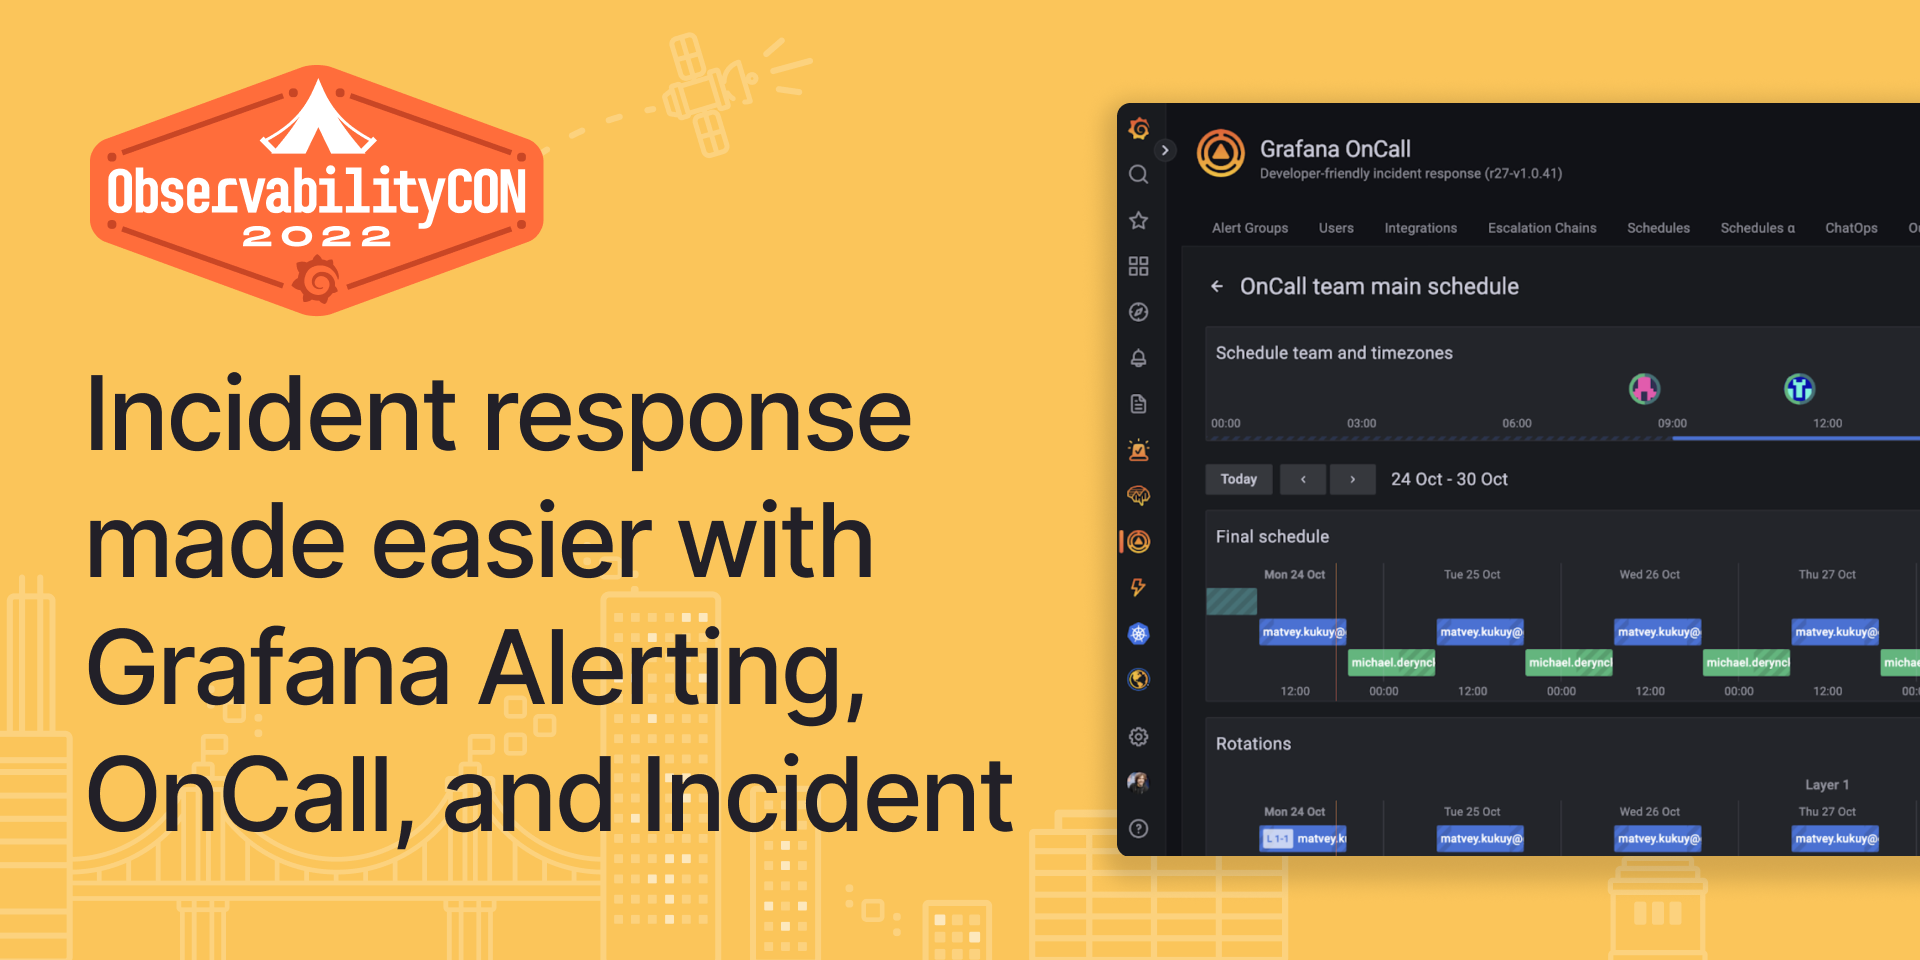 Incident response made easier with Grafana Alerting, OnCall, and Incident